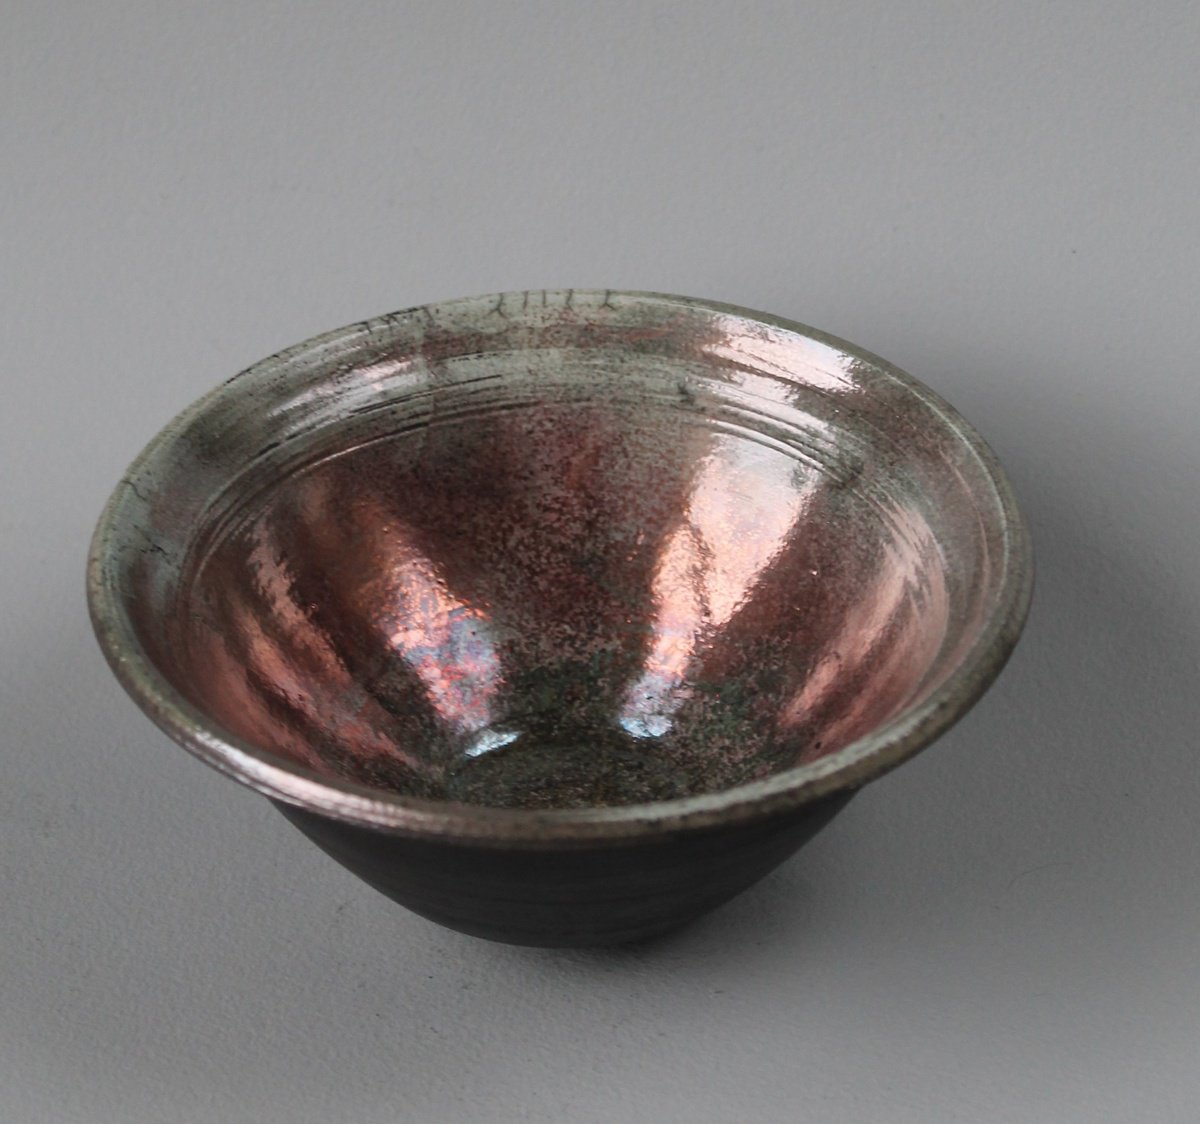 Raku Bowl with Open Rim and Turquoise Lustre. by Monique Robben- Andy Sheppard